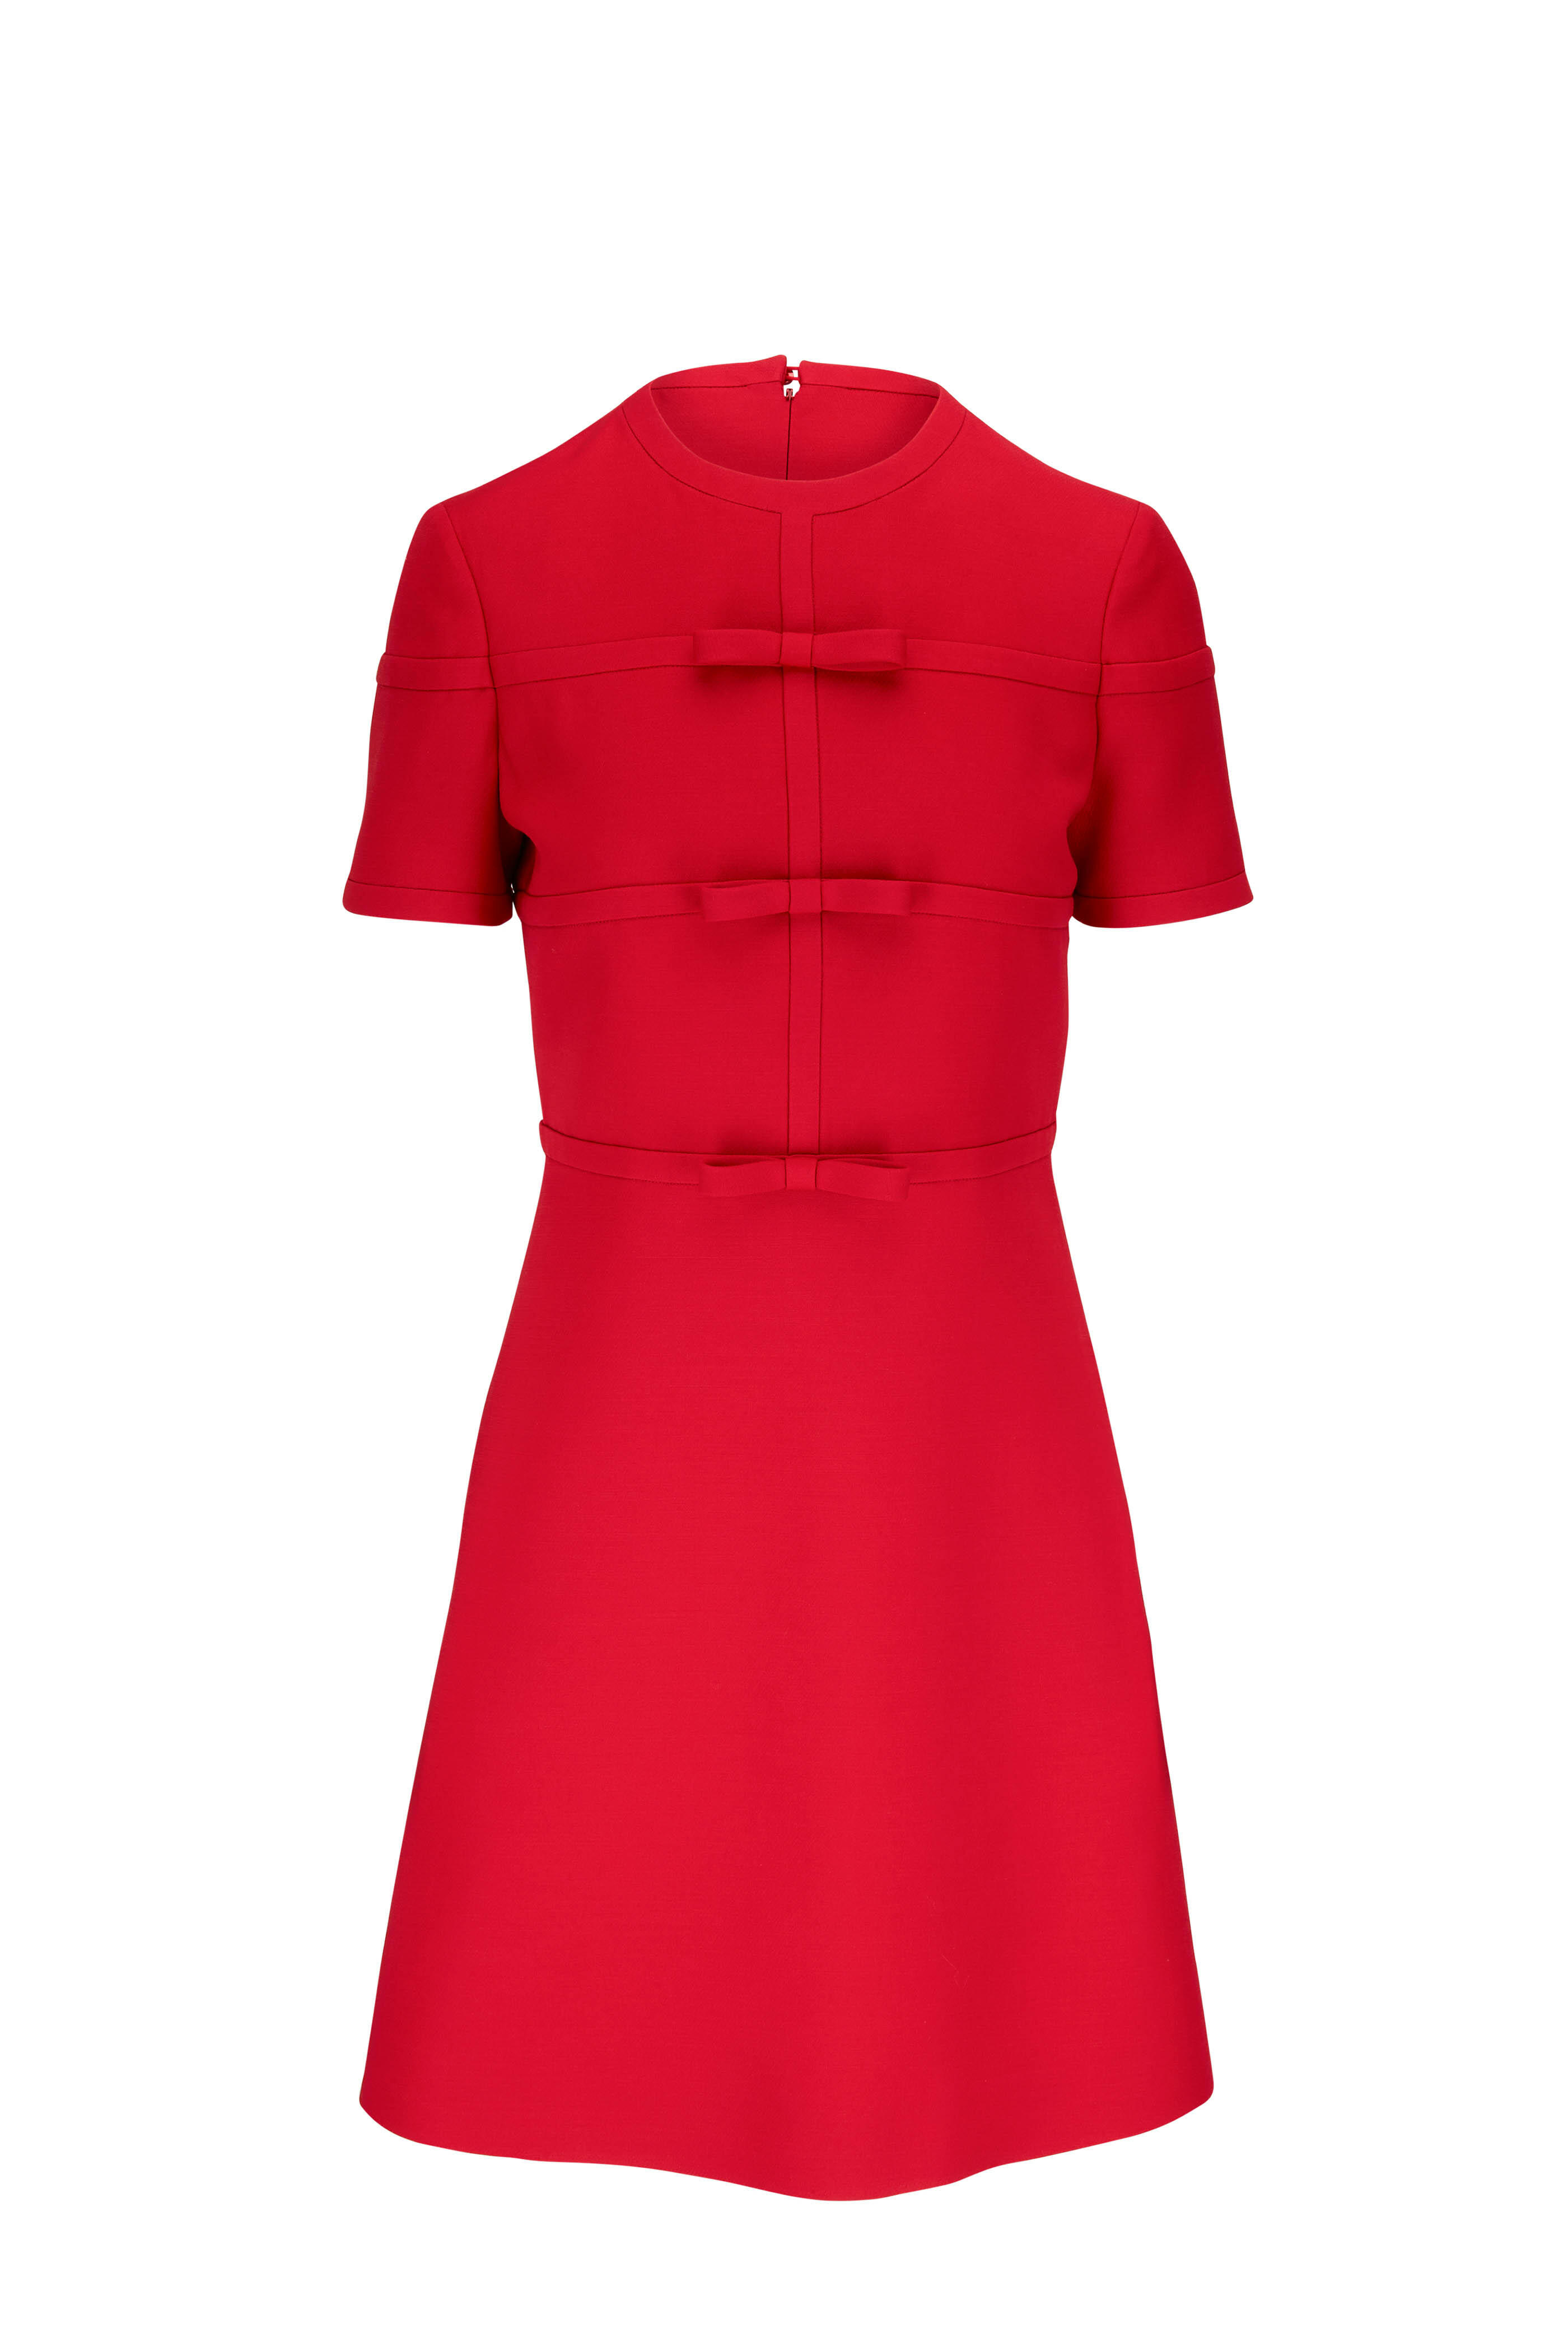 Valentino - Solid Red Crepe Couture Bow A-Line Mini Dress